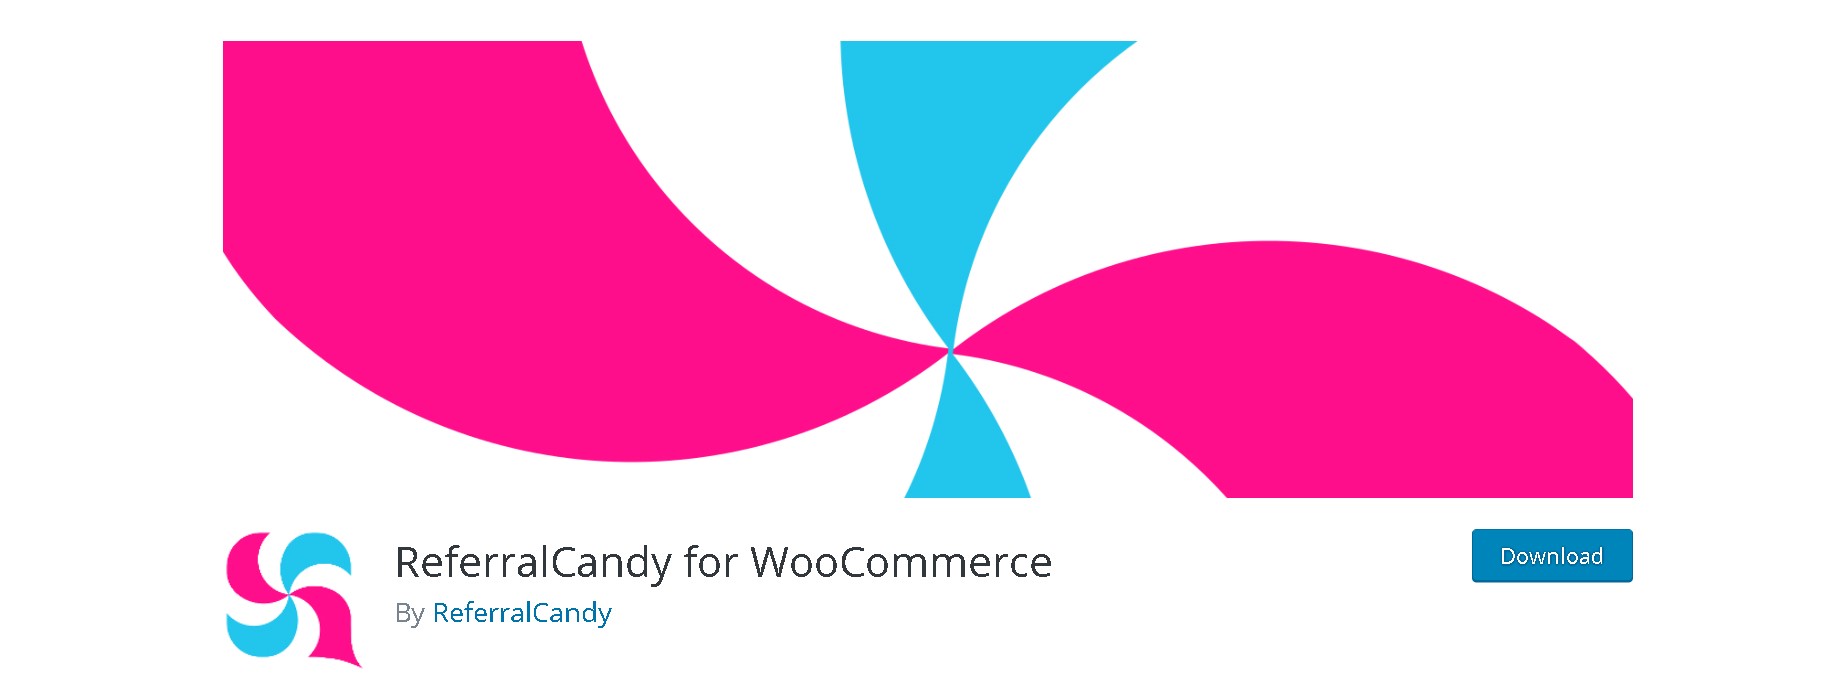 Referral candy for woocommerce